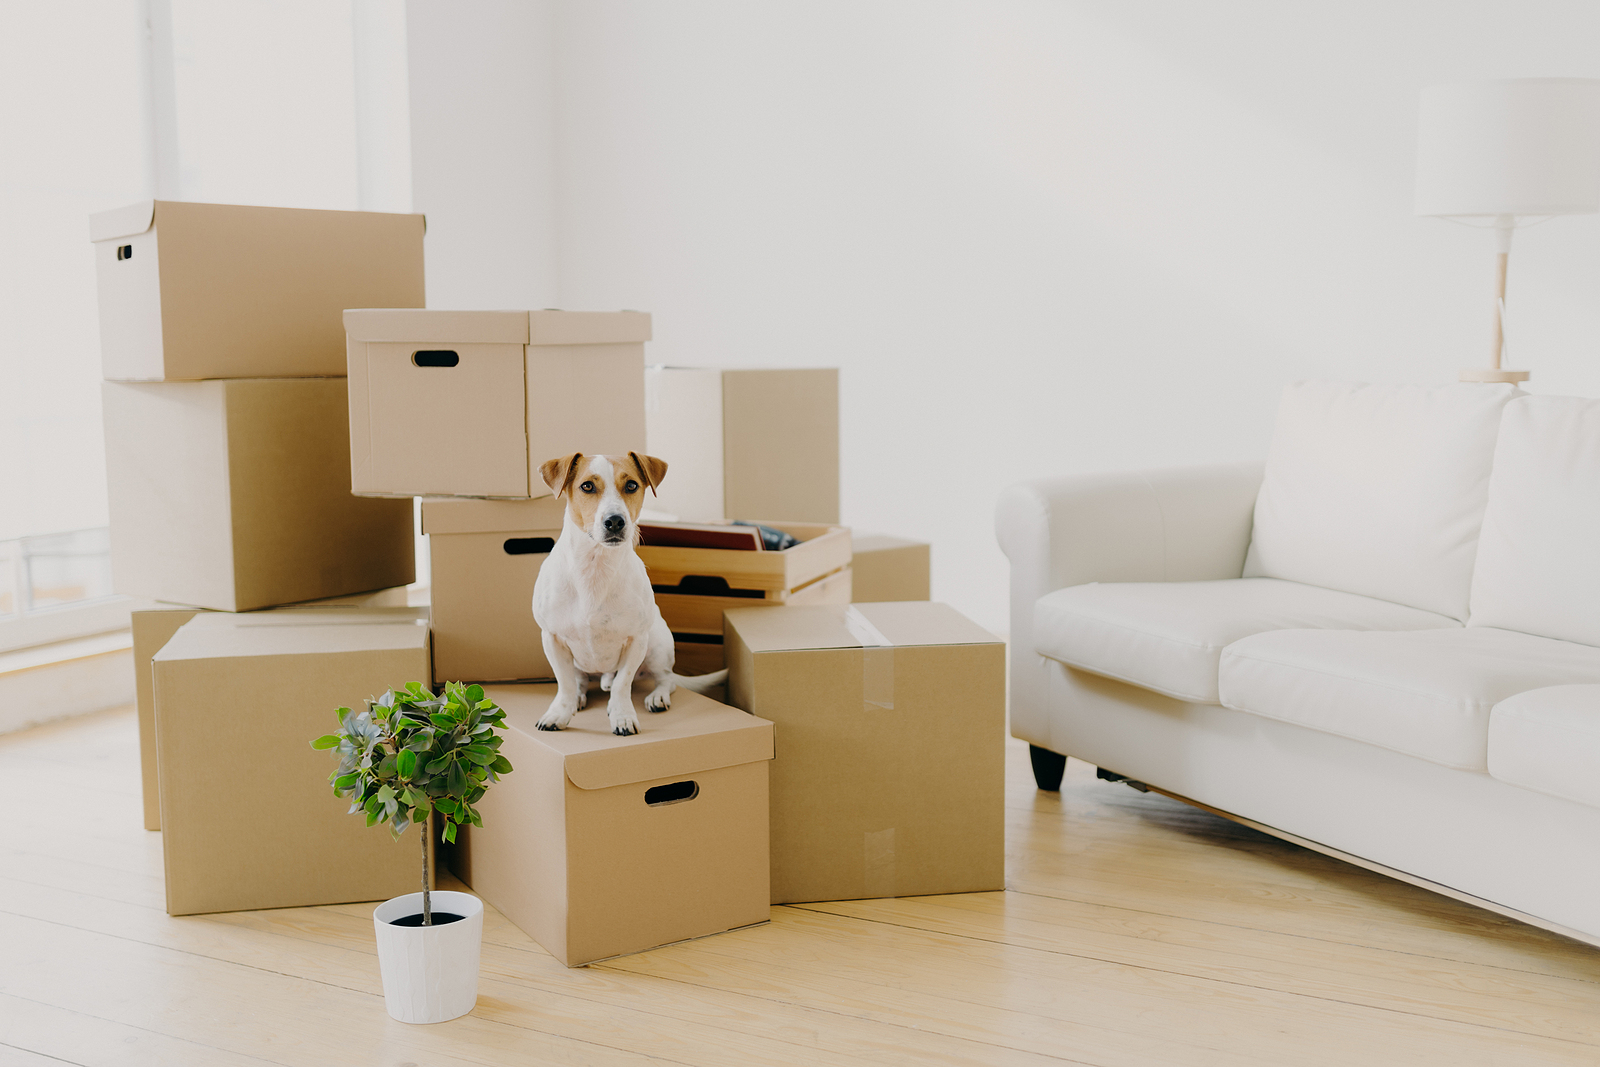 A dog sits on a pile of moving boxes next to a white couch.